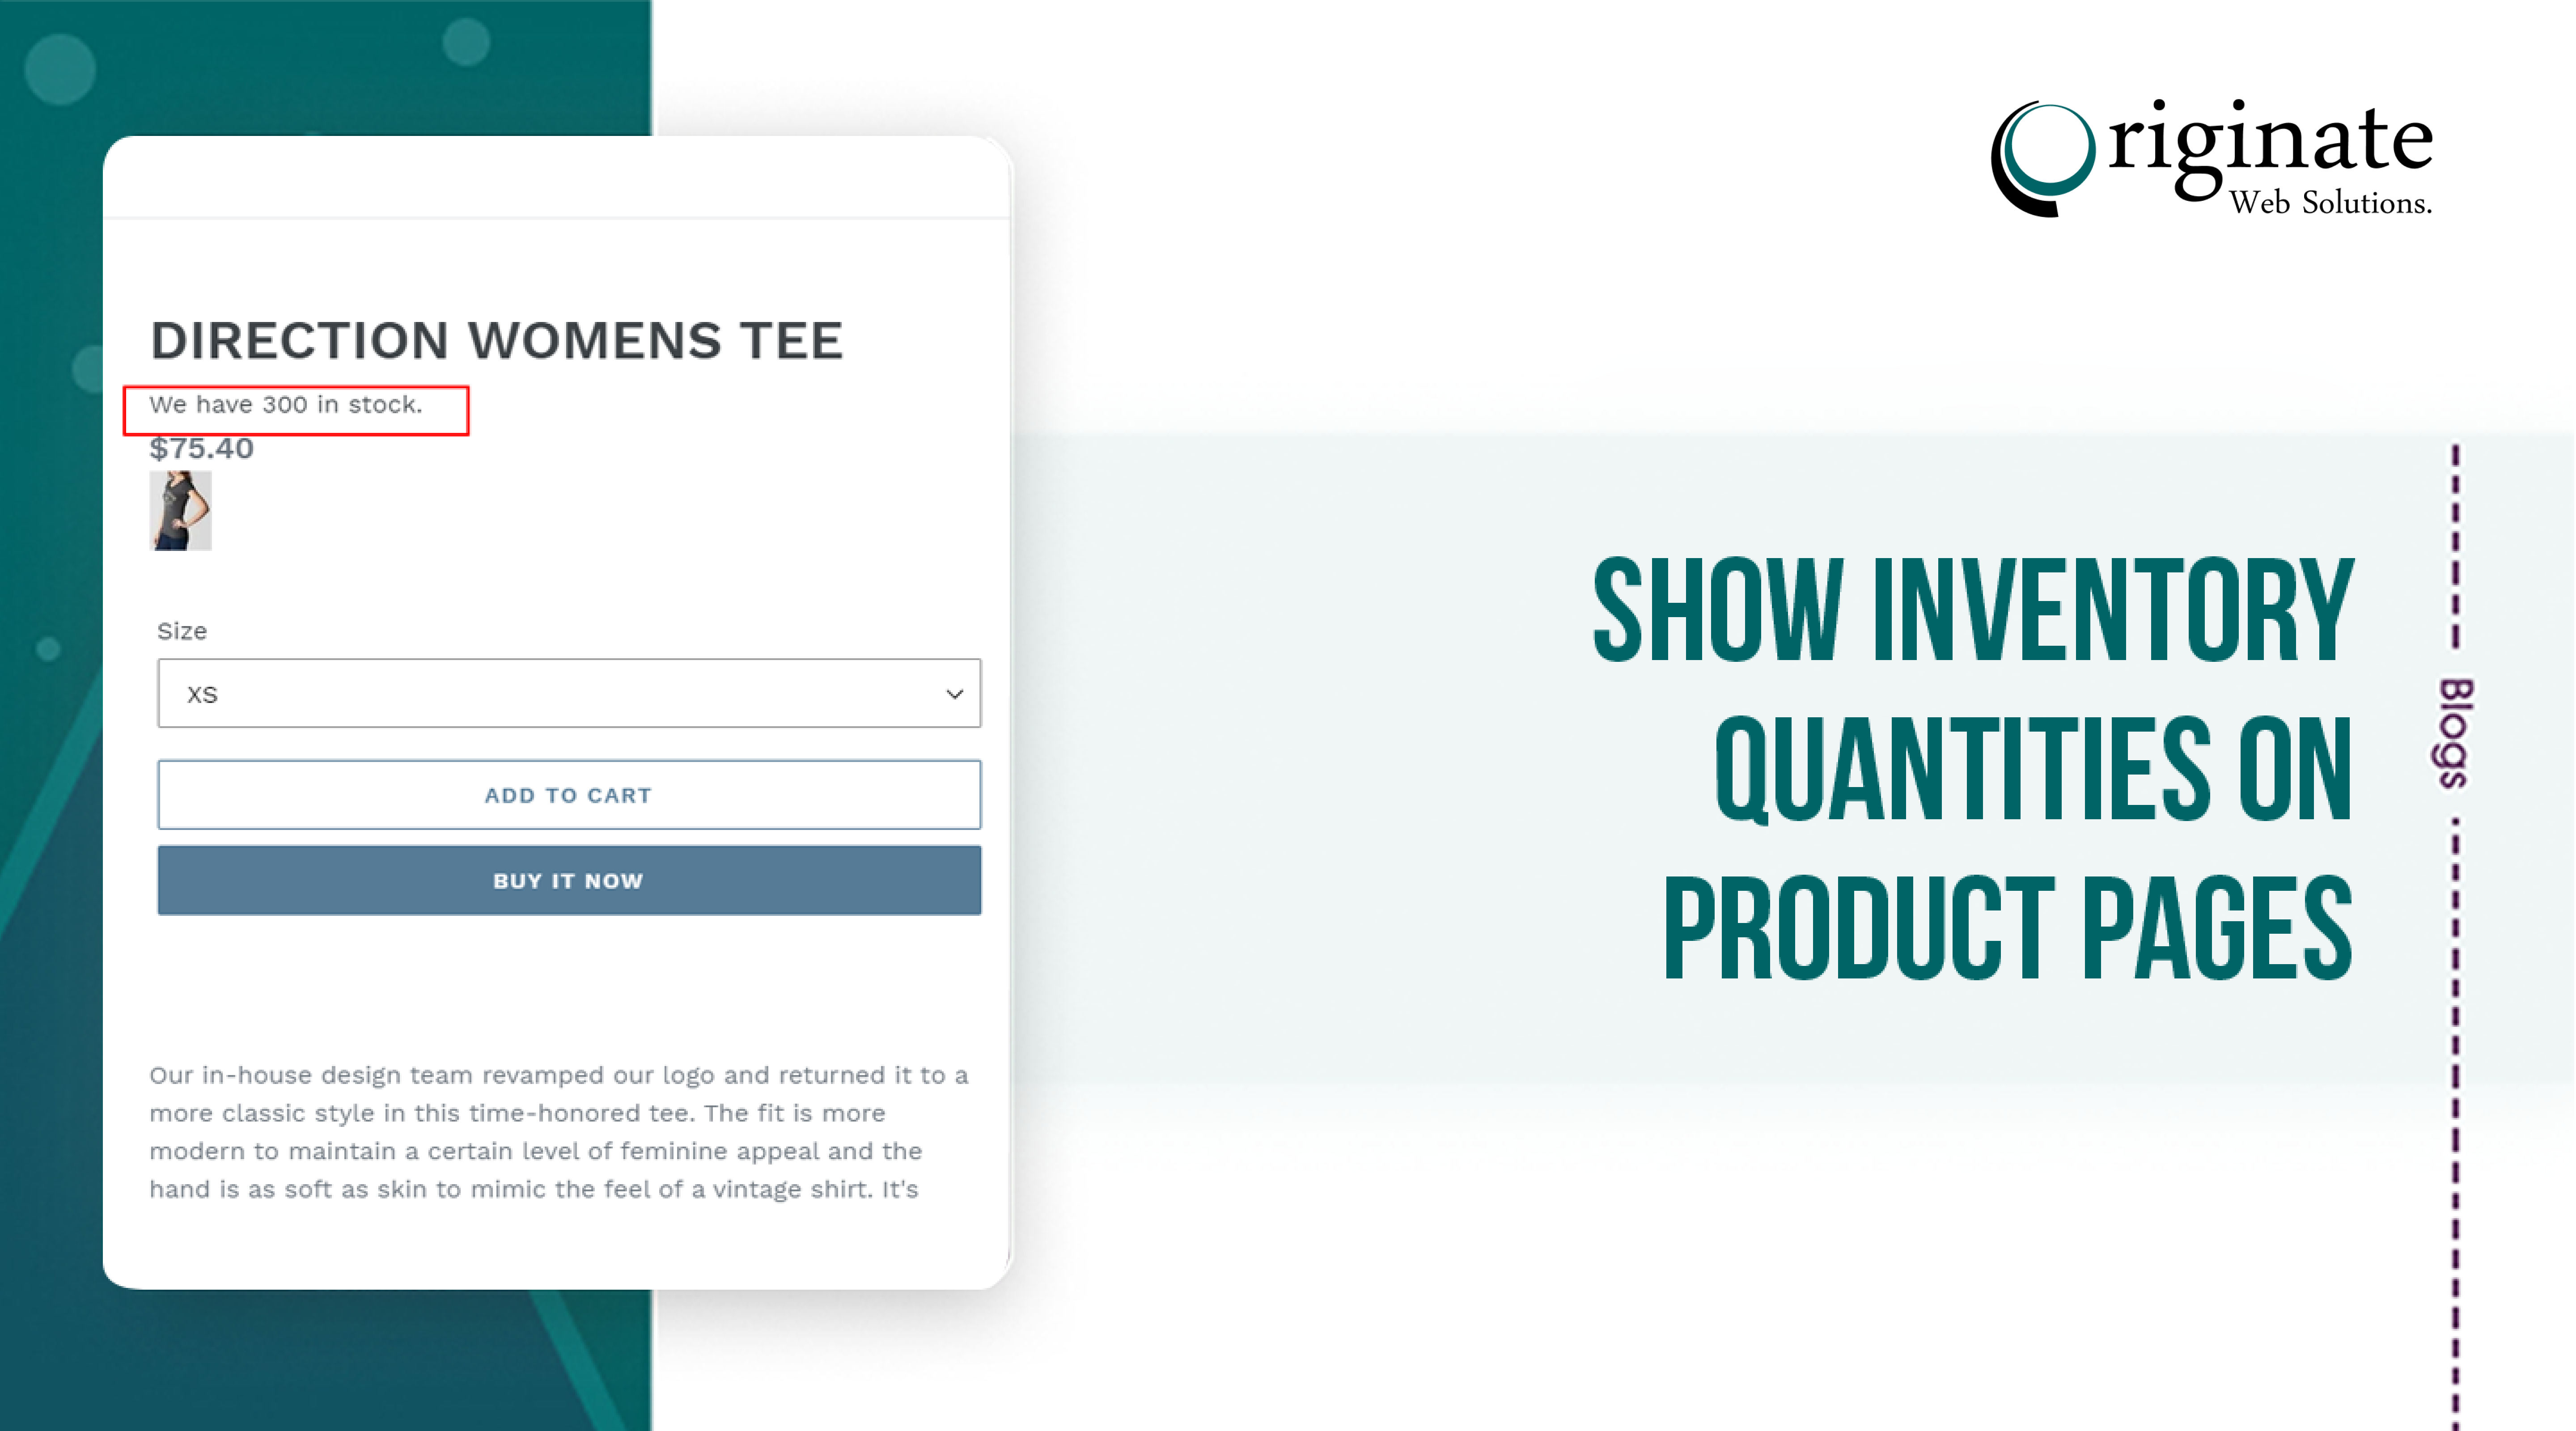 Inventory quantities on product pages